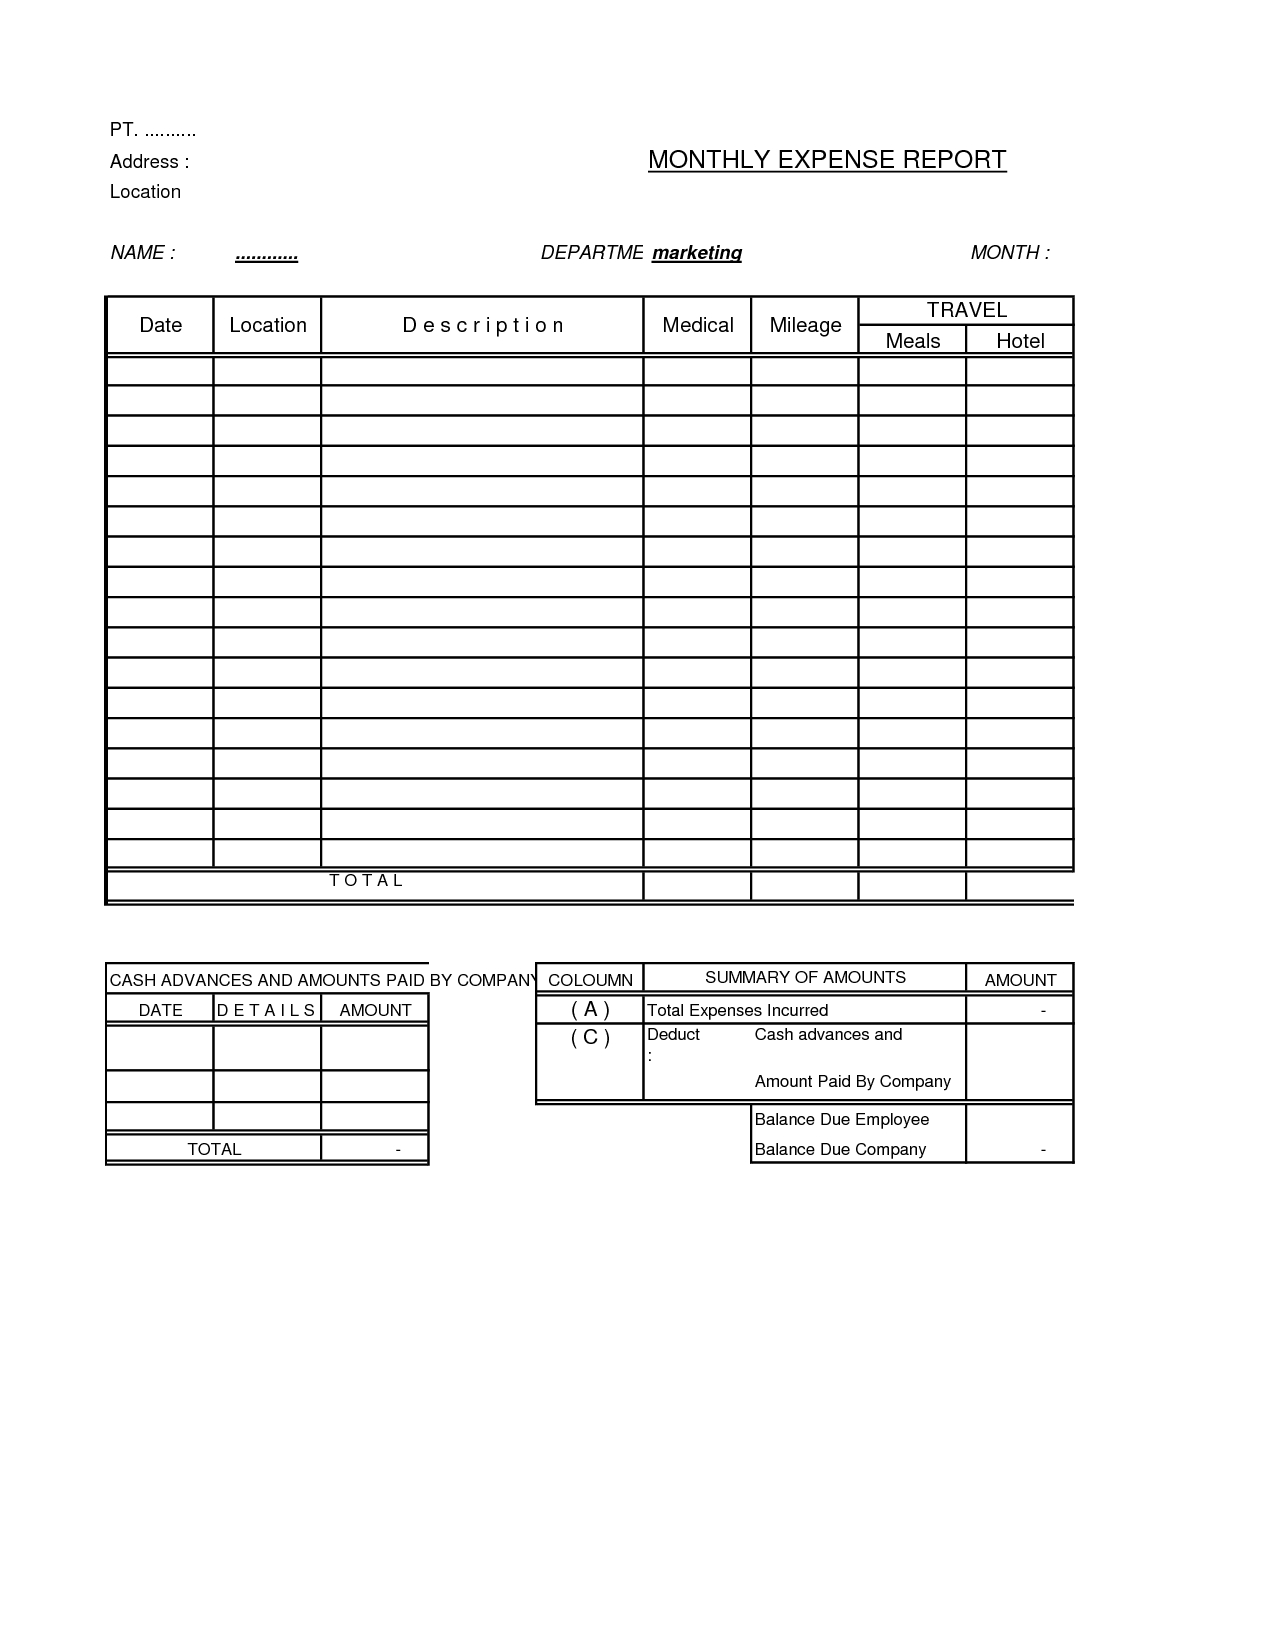 Expense Report Form And Samples For Your Inspirations With Regard To Microsoft Word Expense Report Template